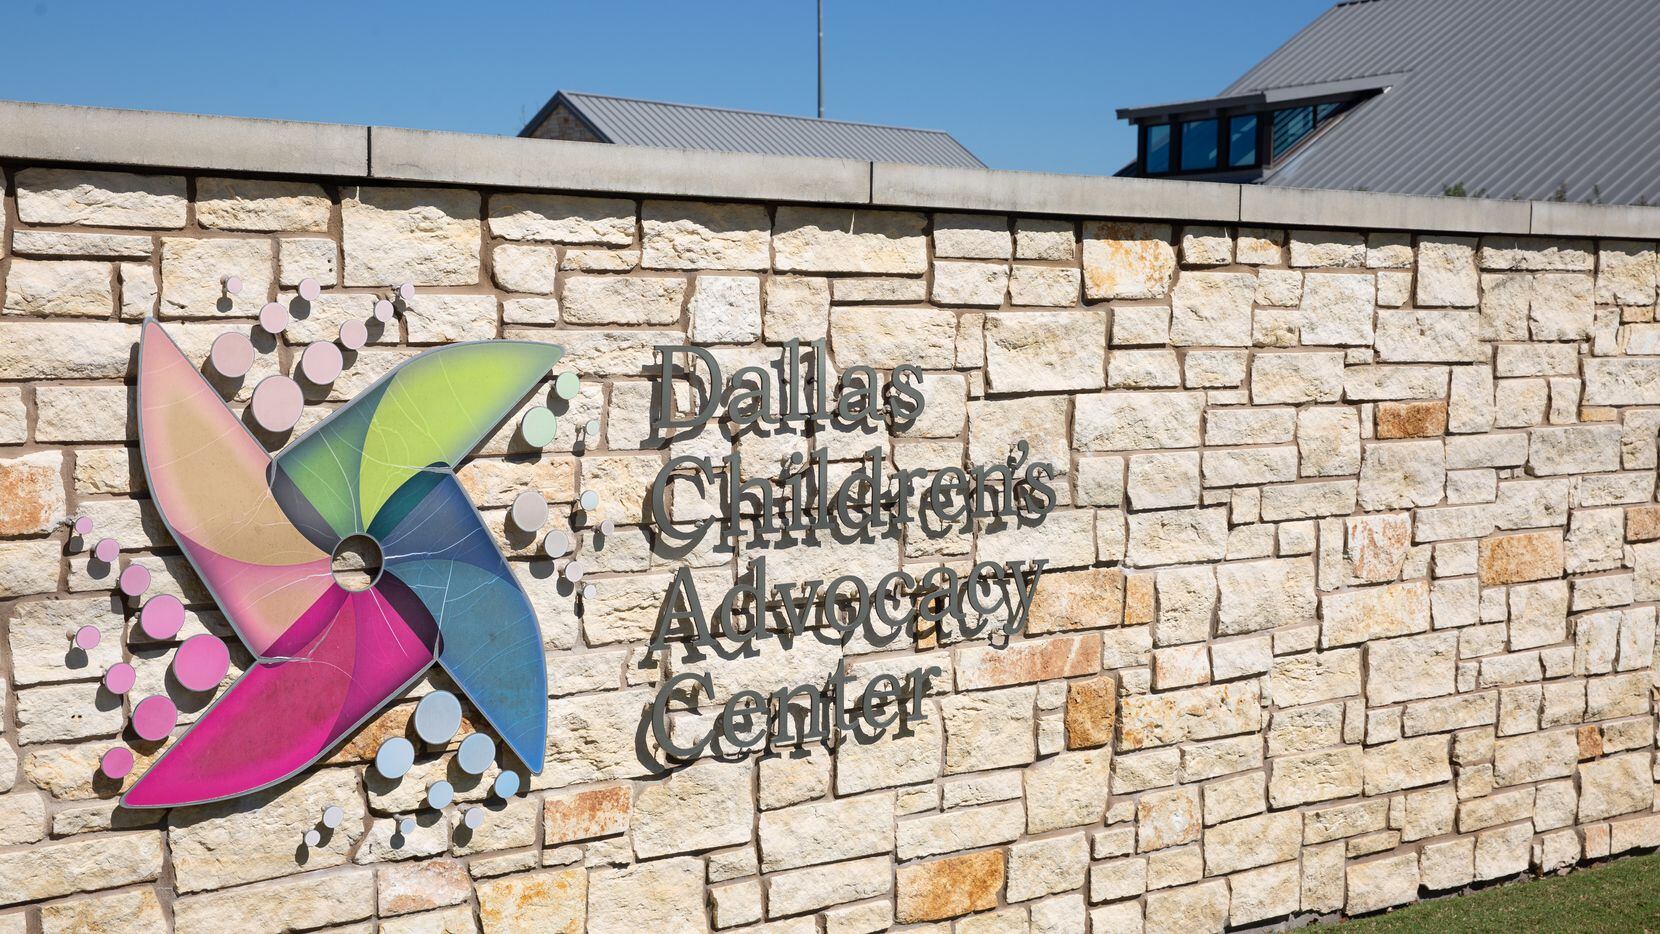 The staff at the Dallas Children’s Advocacy Center handles some of the worst abuse cases in...